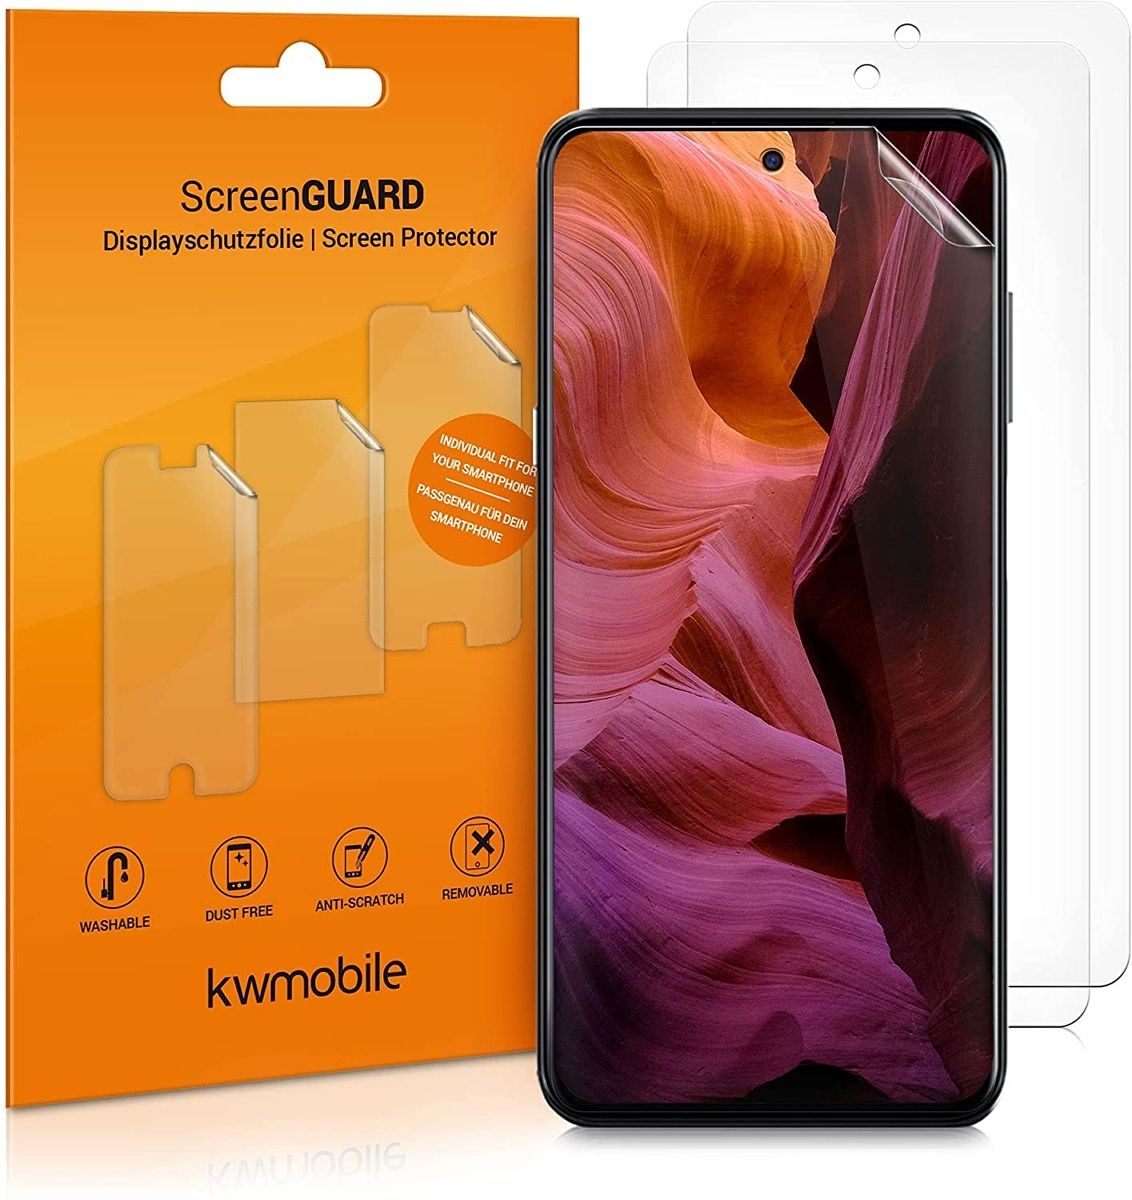 If you prefer PET films over TPU screen protectors or tempered glass, the Kwmobile Screenguard is a good option for your TCL 20S. It's scratch-resistant and comes with an oleophobic coating. In addition, the film is easy to apply.